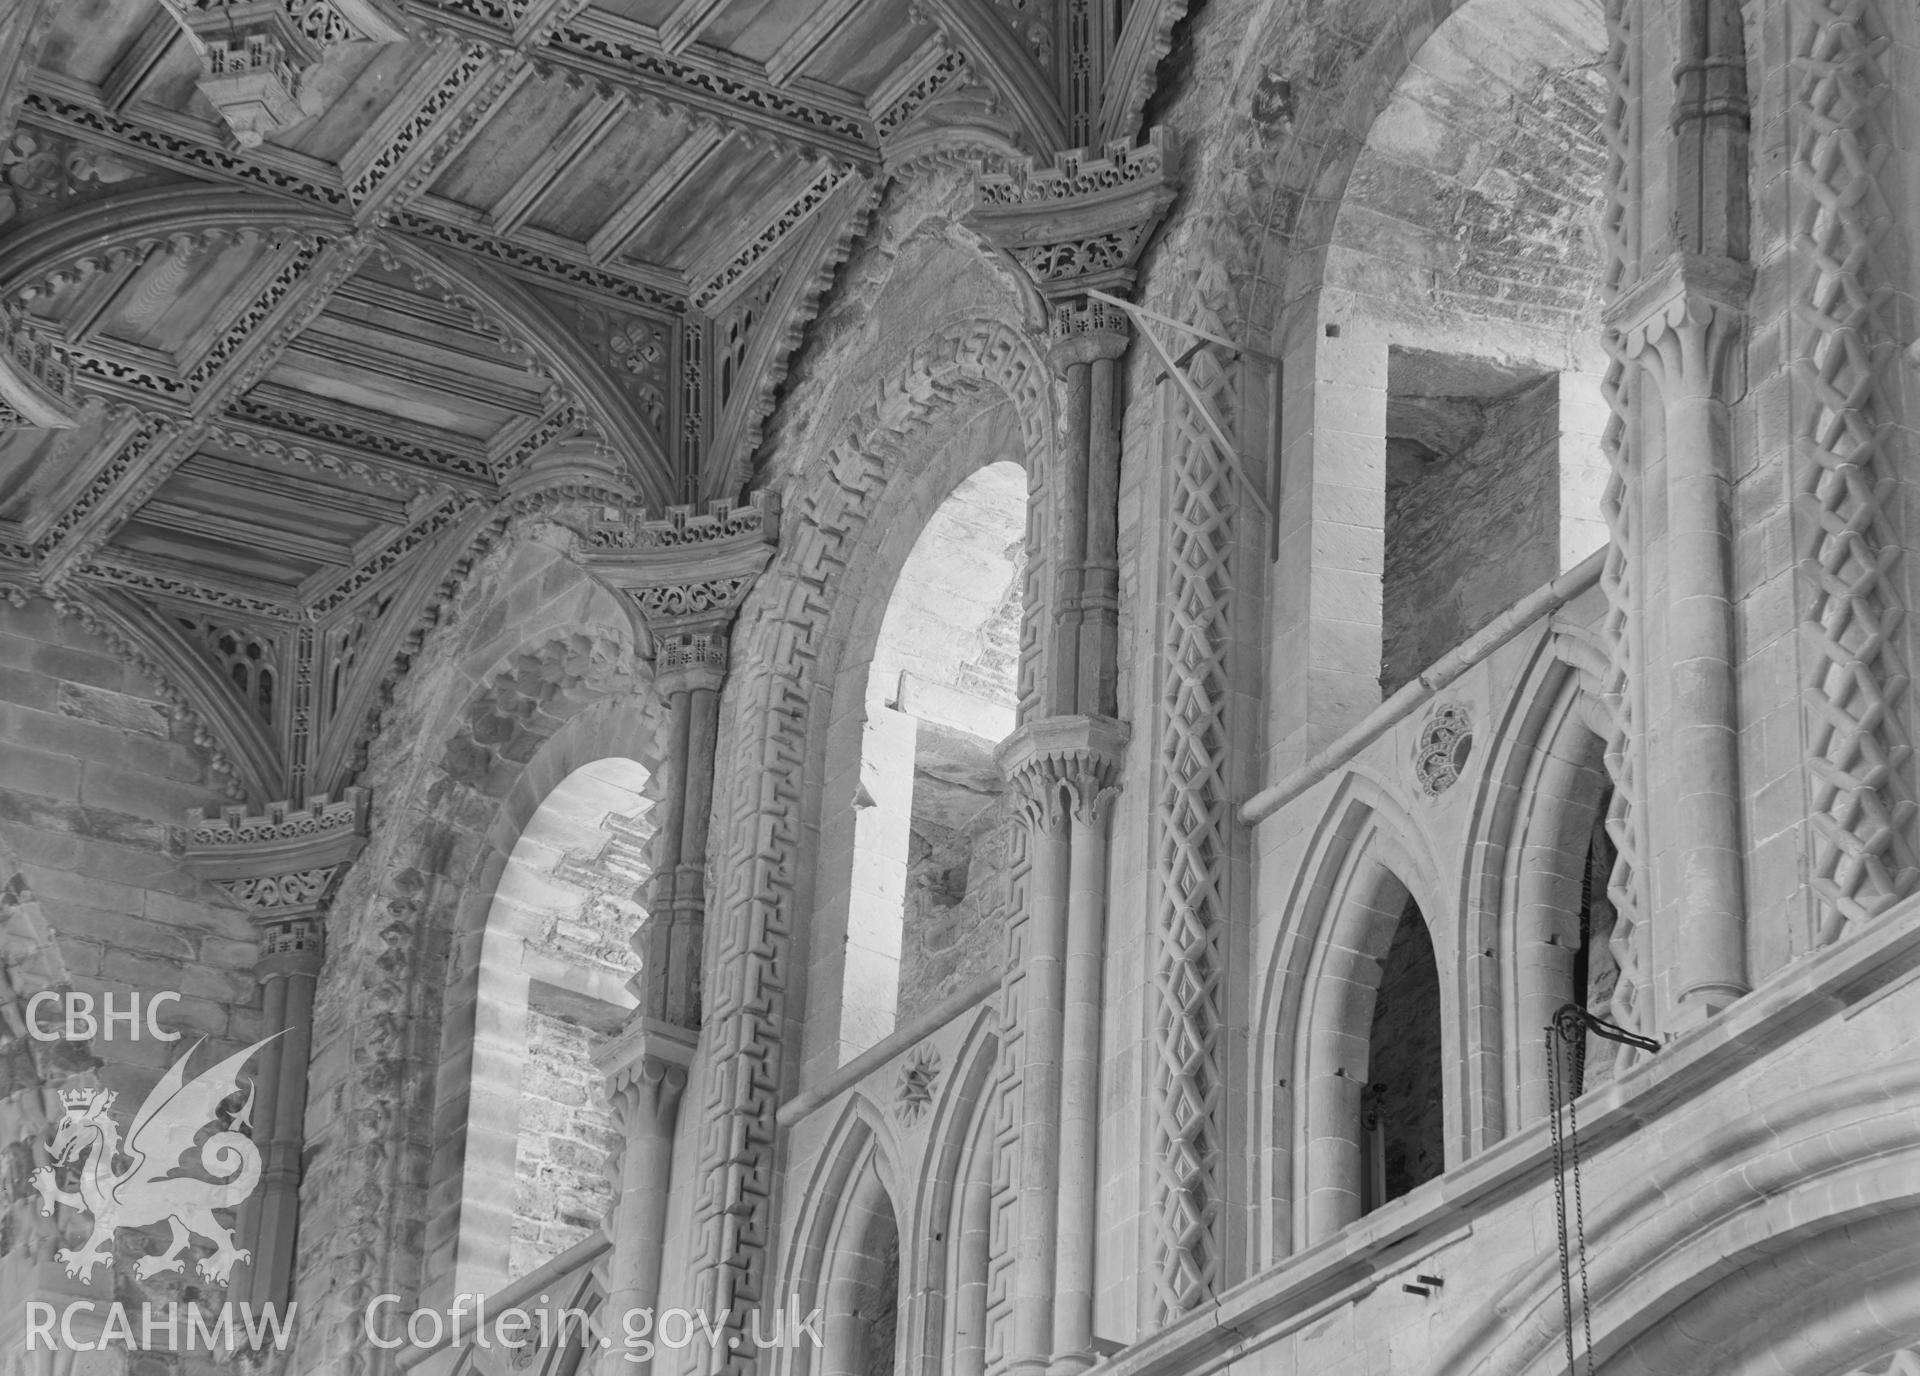 Digital copy of a black and white acetate negative showing decorated arches and ceiling pendants in St. David's Cathedral, taken by E.W. Lovegrove, July 1936.